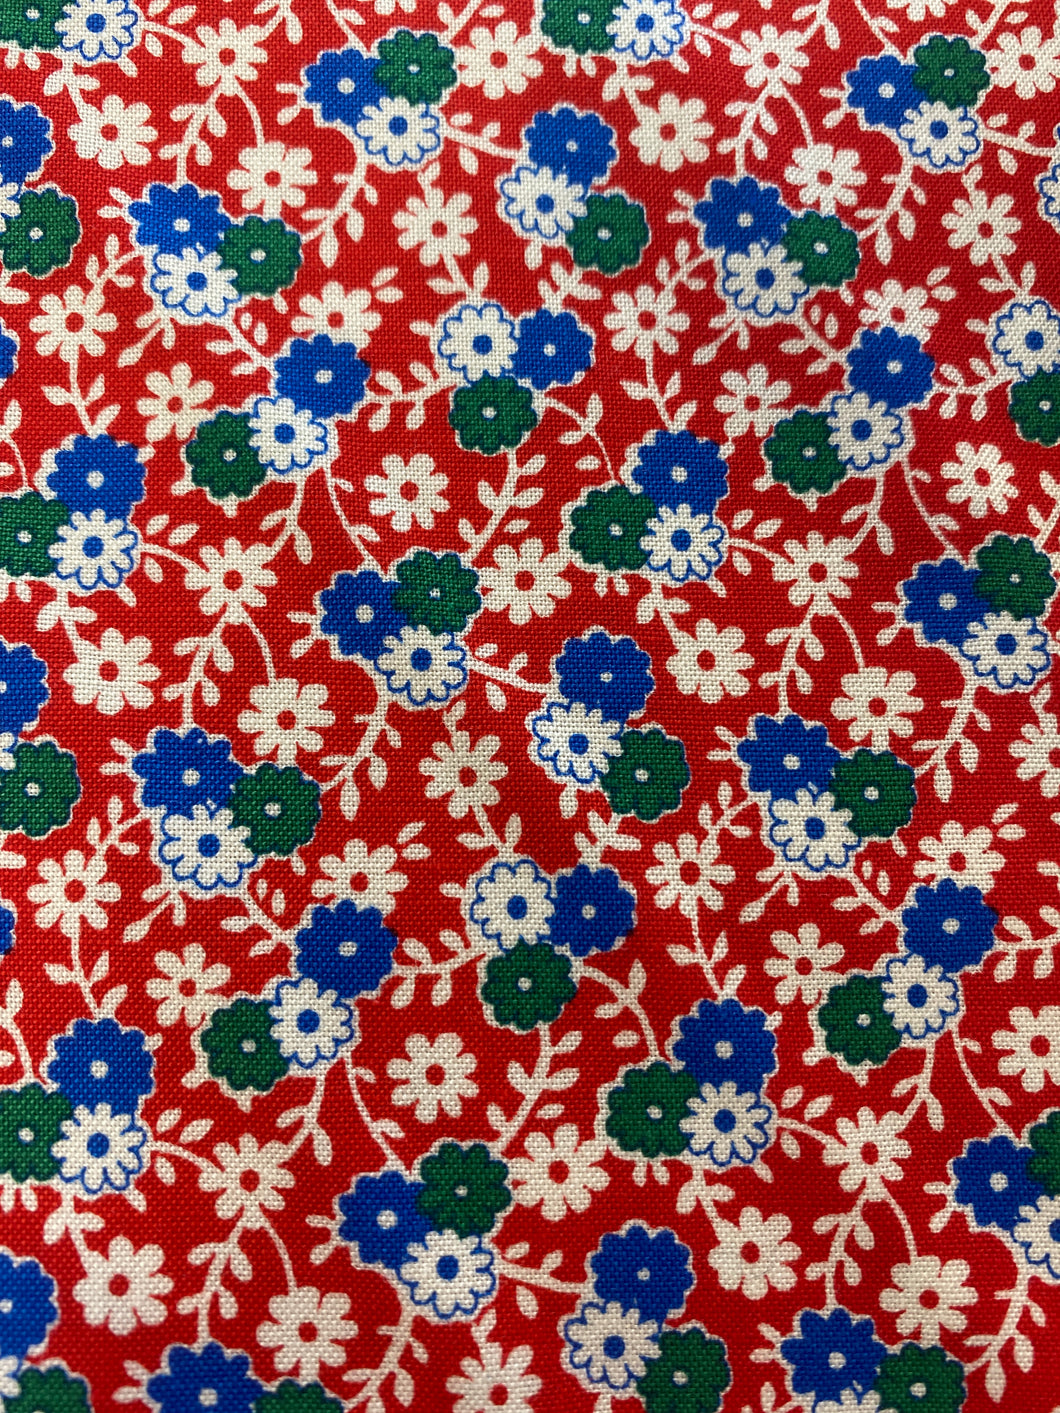 Red/green/blue/white flowers